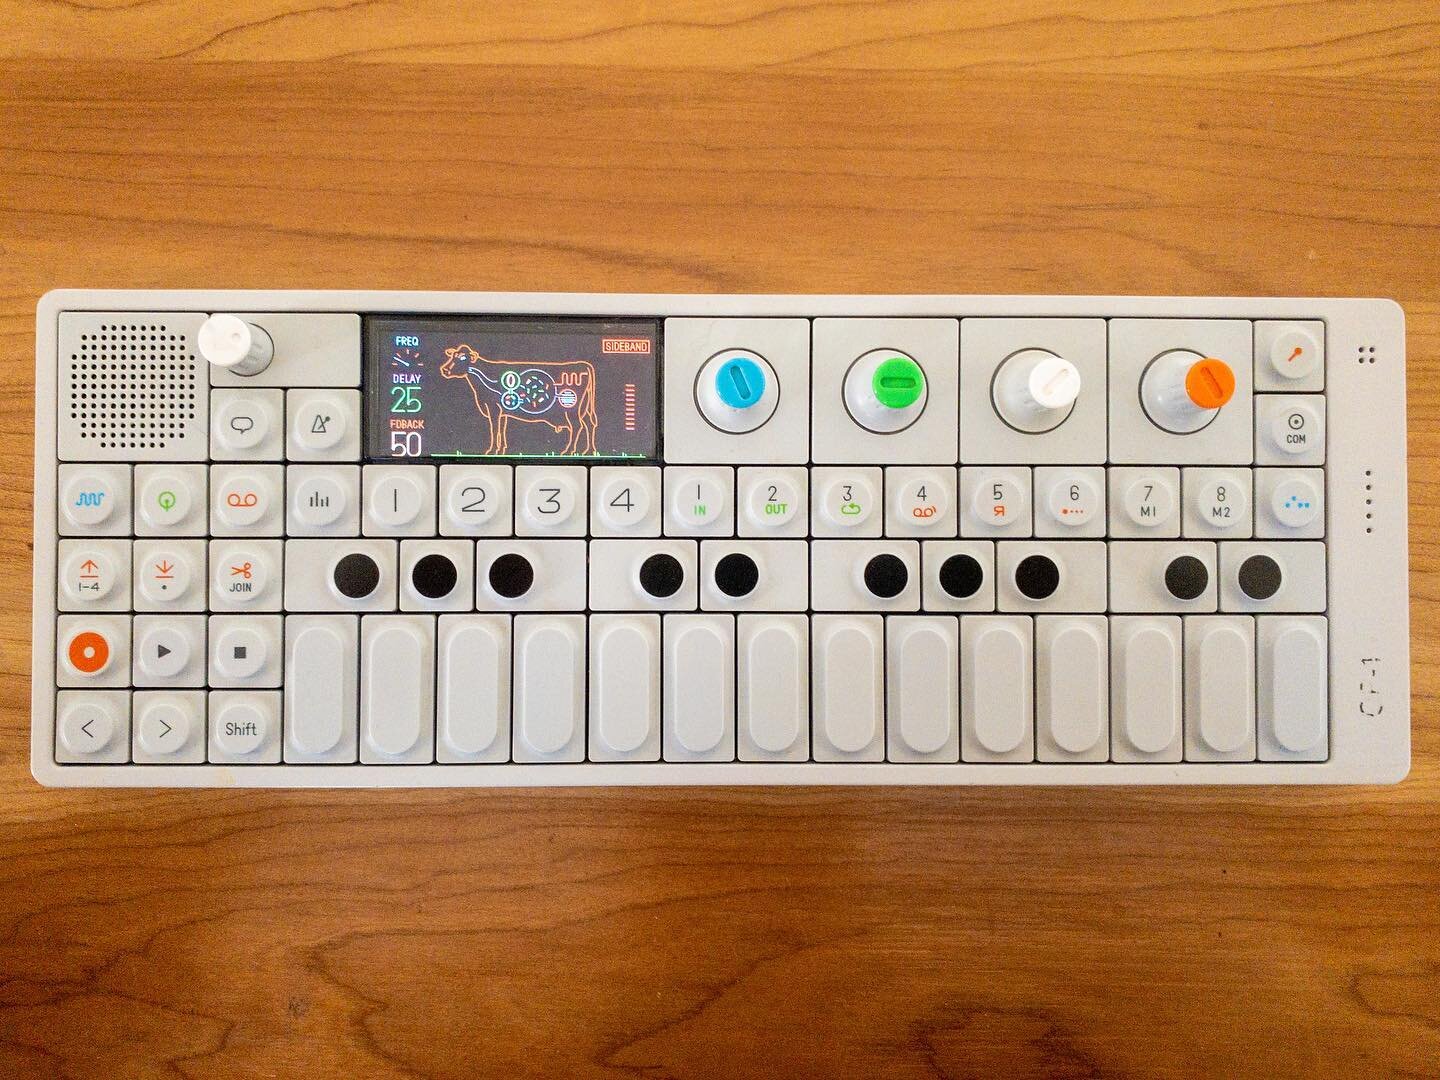 The latest addition! I&rsquo;ve always wanted a Teenage Engineering OP-1, welcome to the fam! 

Big thanks to my lovely girlfriend @thefirstnoellee for pushing me to finally get one. ❤️

#gameaudio #sounddesign #sound #teenageengineering #op1 #gamede